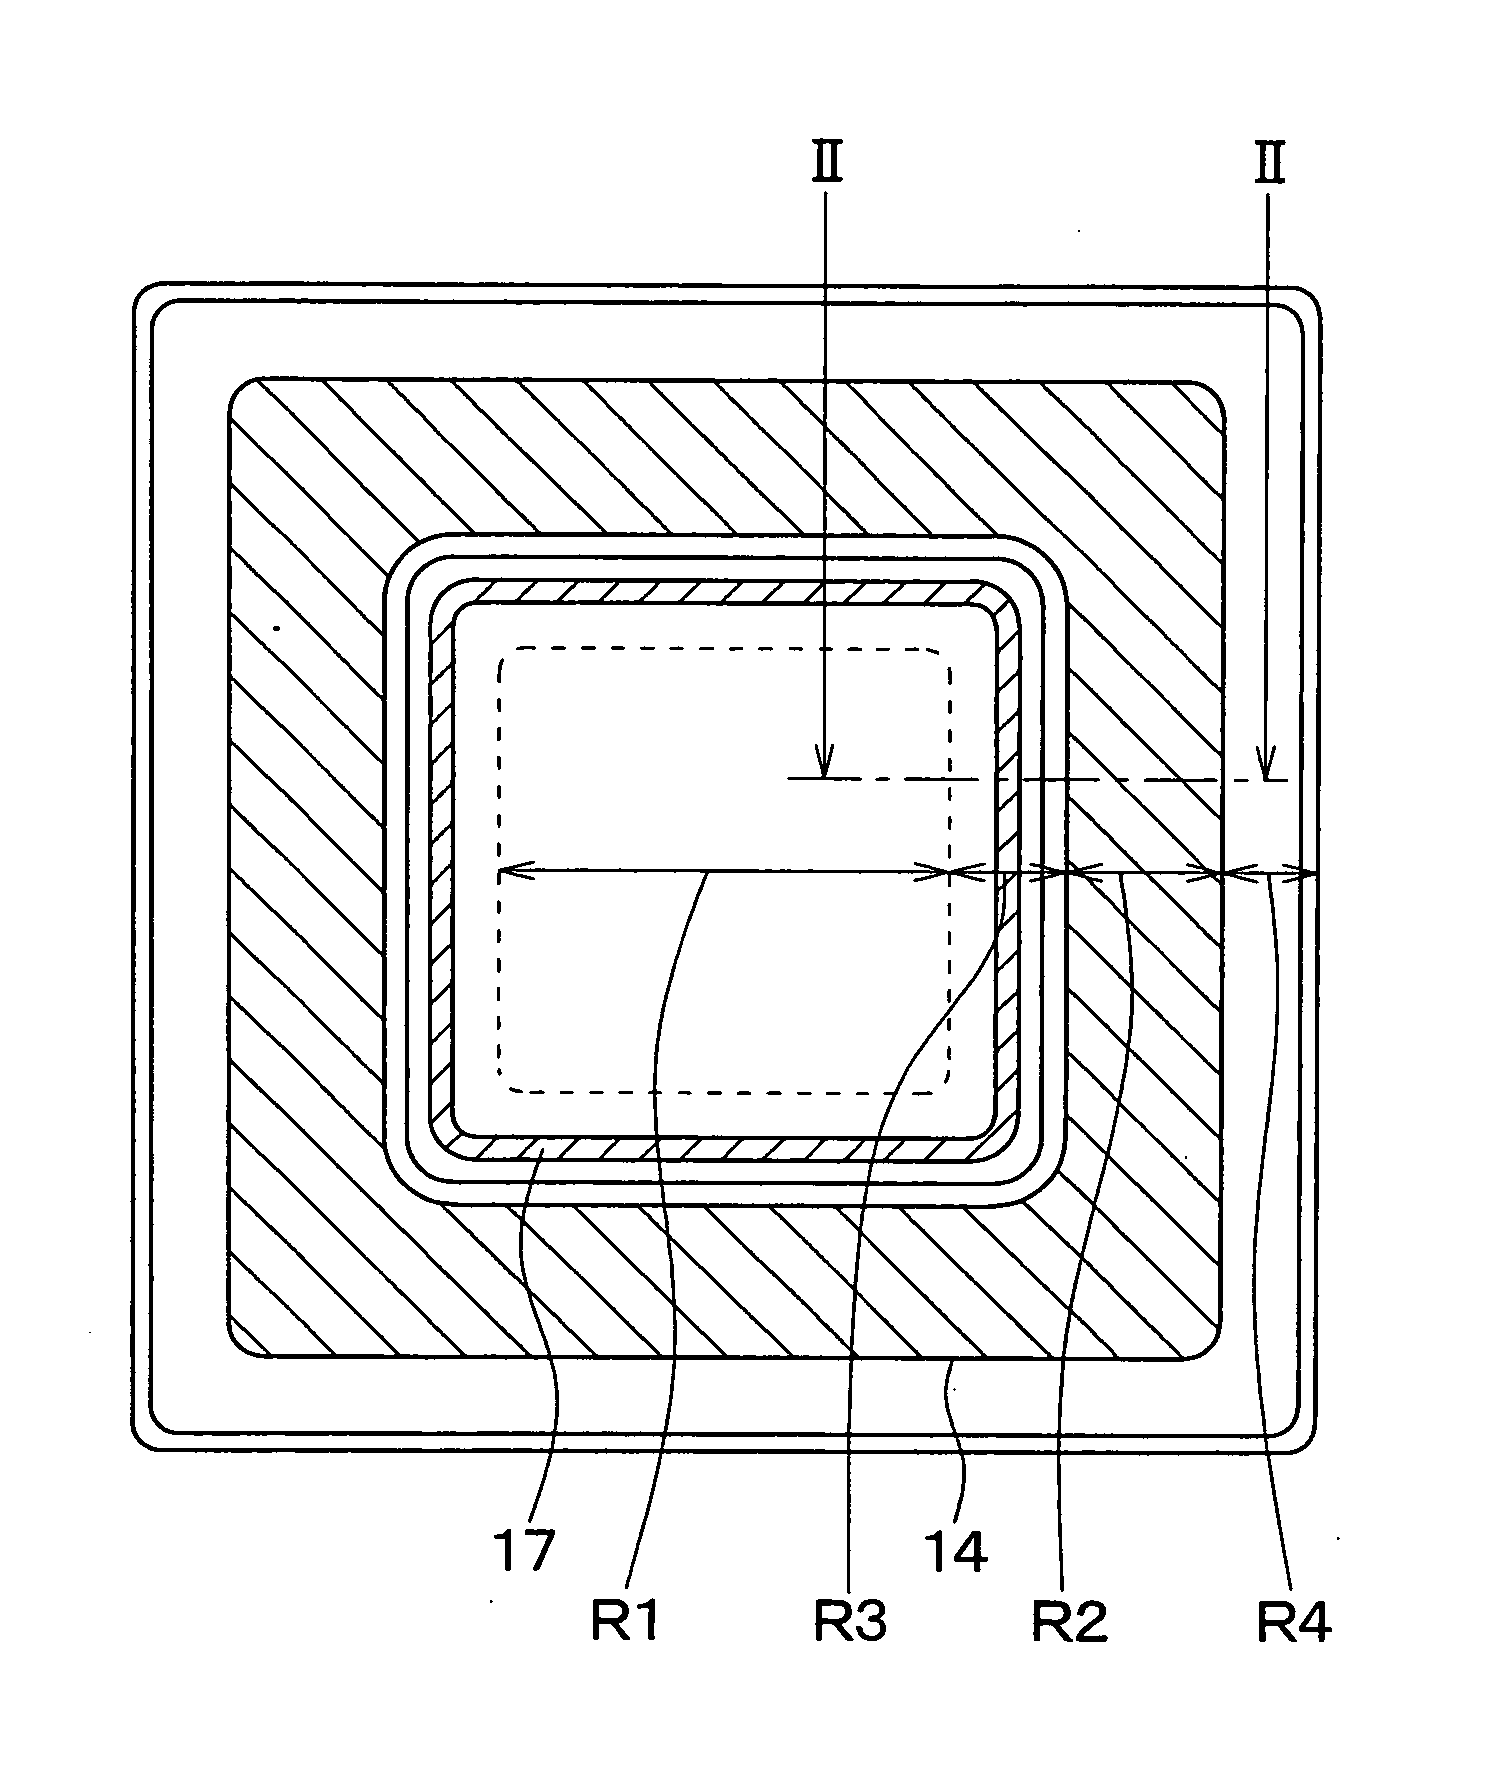 Wide band gap semiconductor device including junction field effect transistor